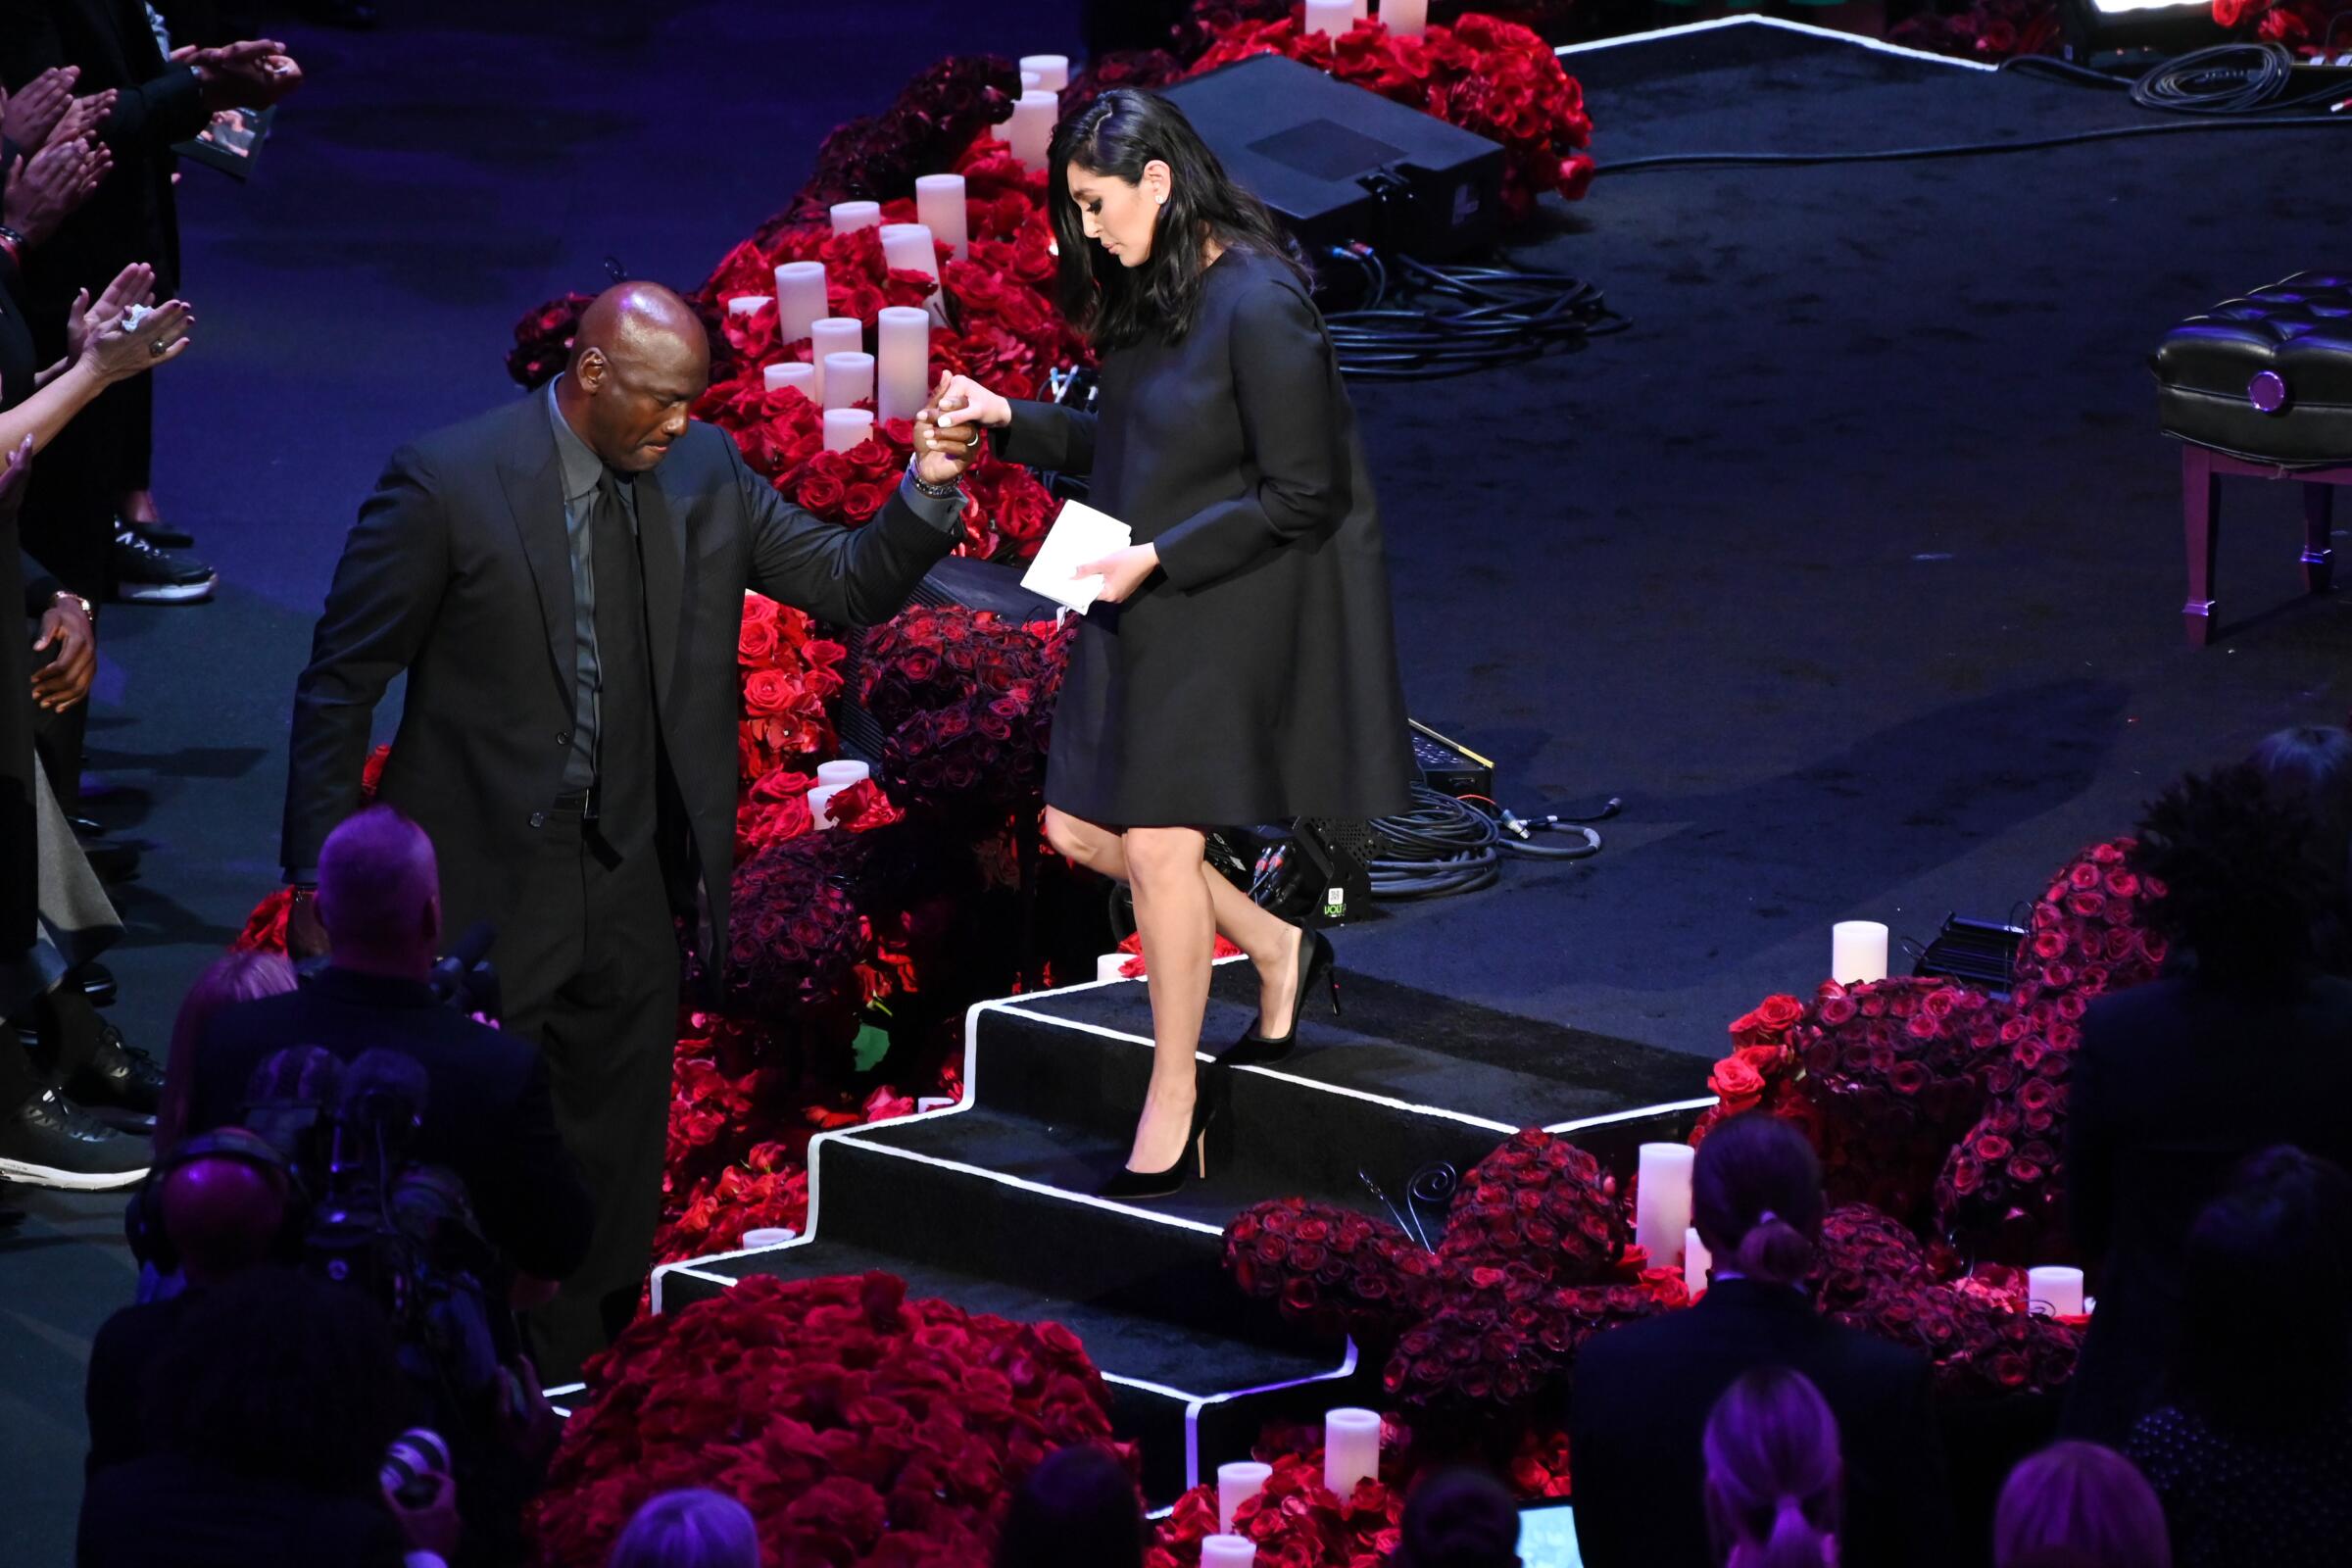 LOS ANGELES, CA., Michael Jordan helps Vanessa Bryant off the stage at the Kobe & Gianna Bryant Celebration of Life on Monday at Staples Center on Monday 24, 2020 (Wally Skalij / Los Angeles Times)